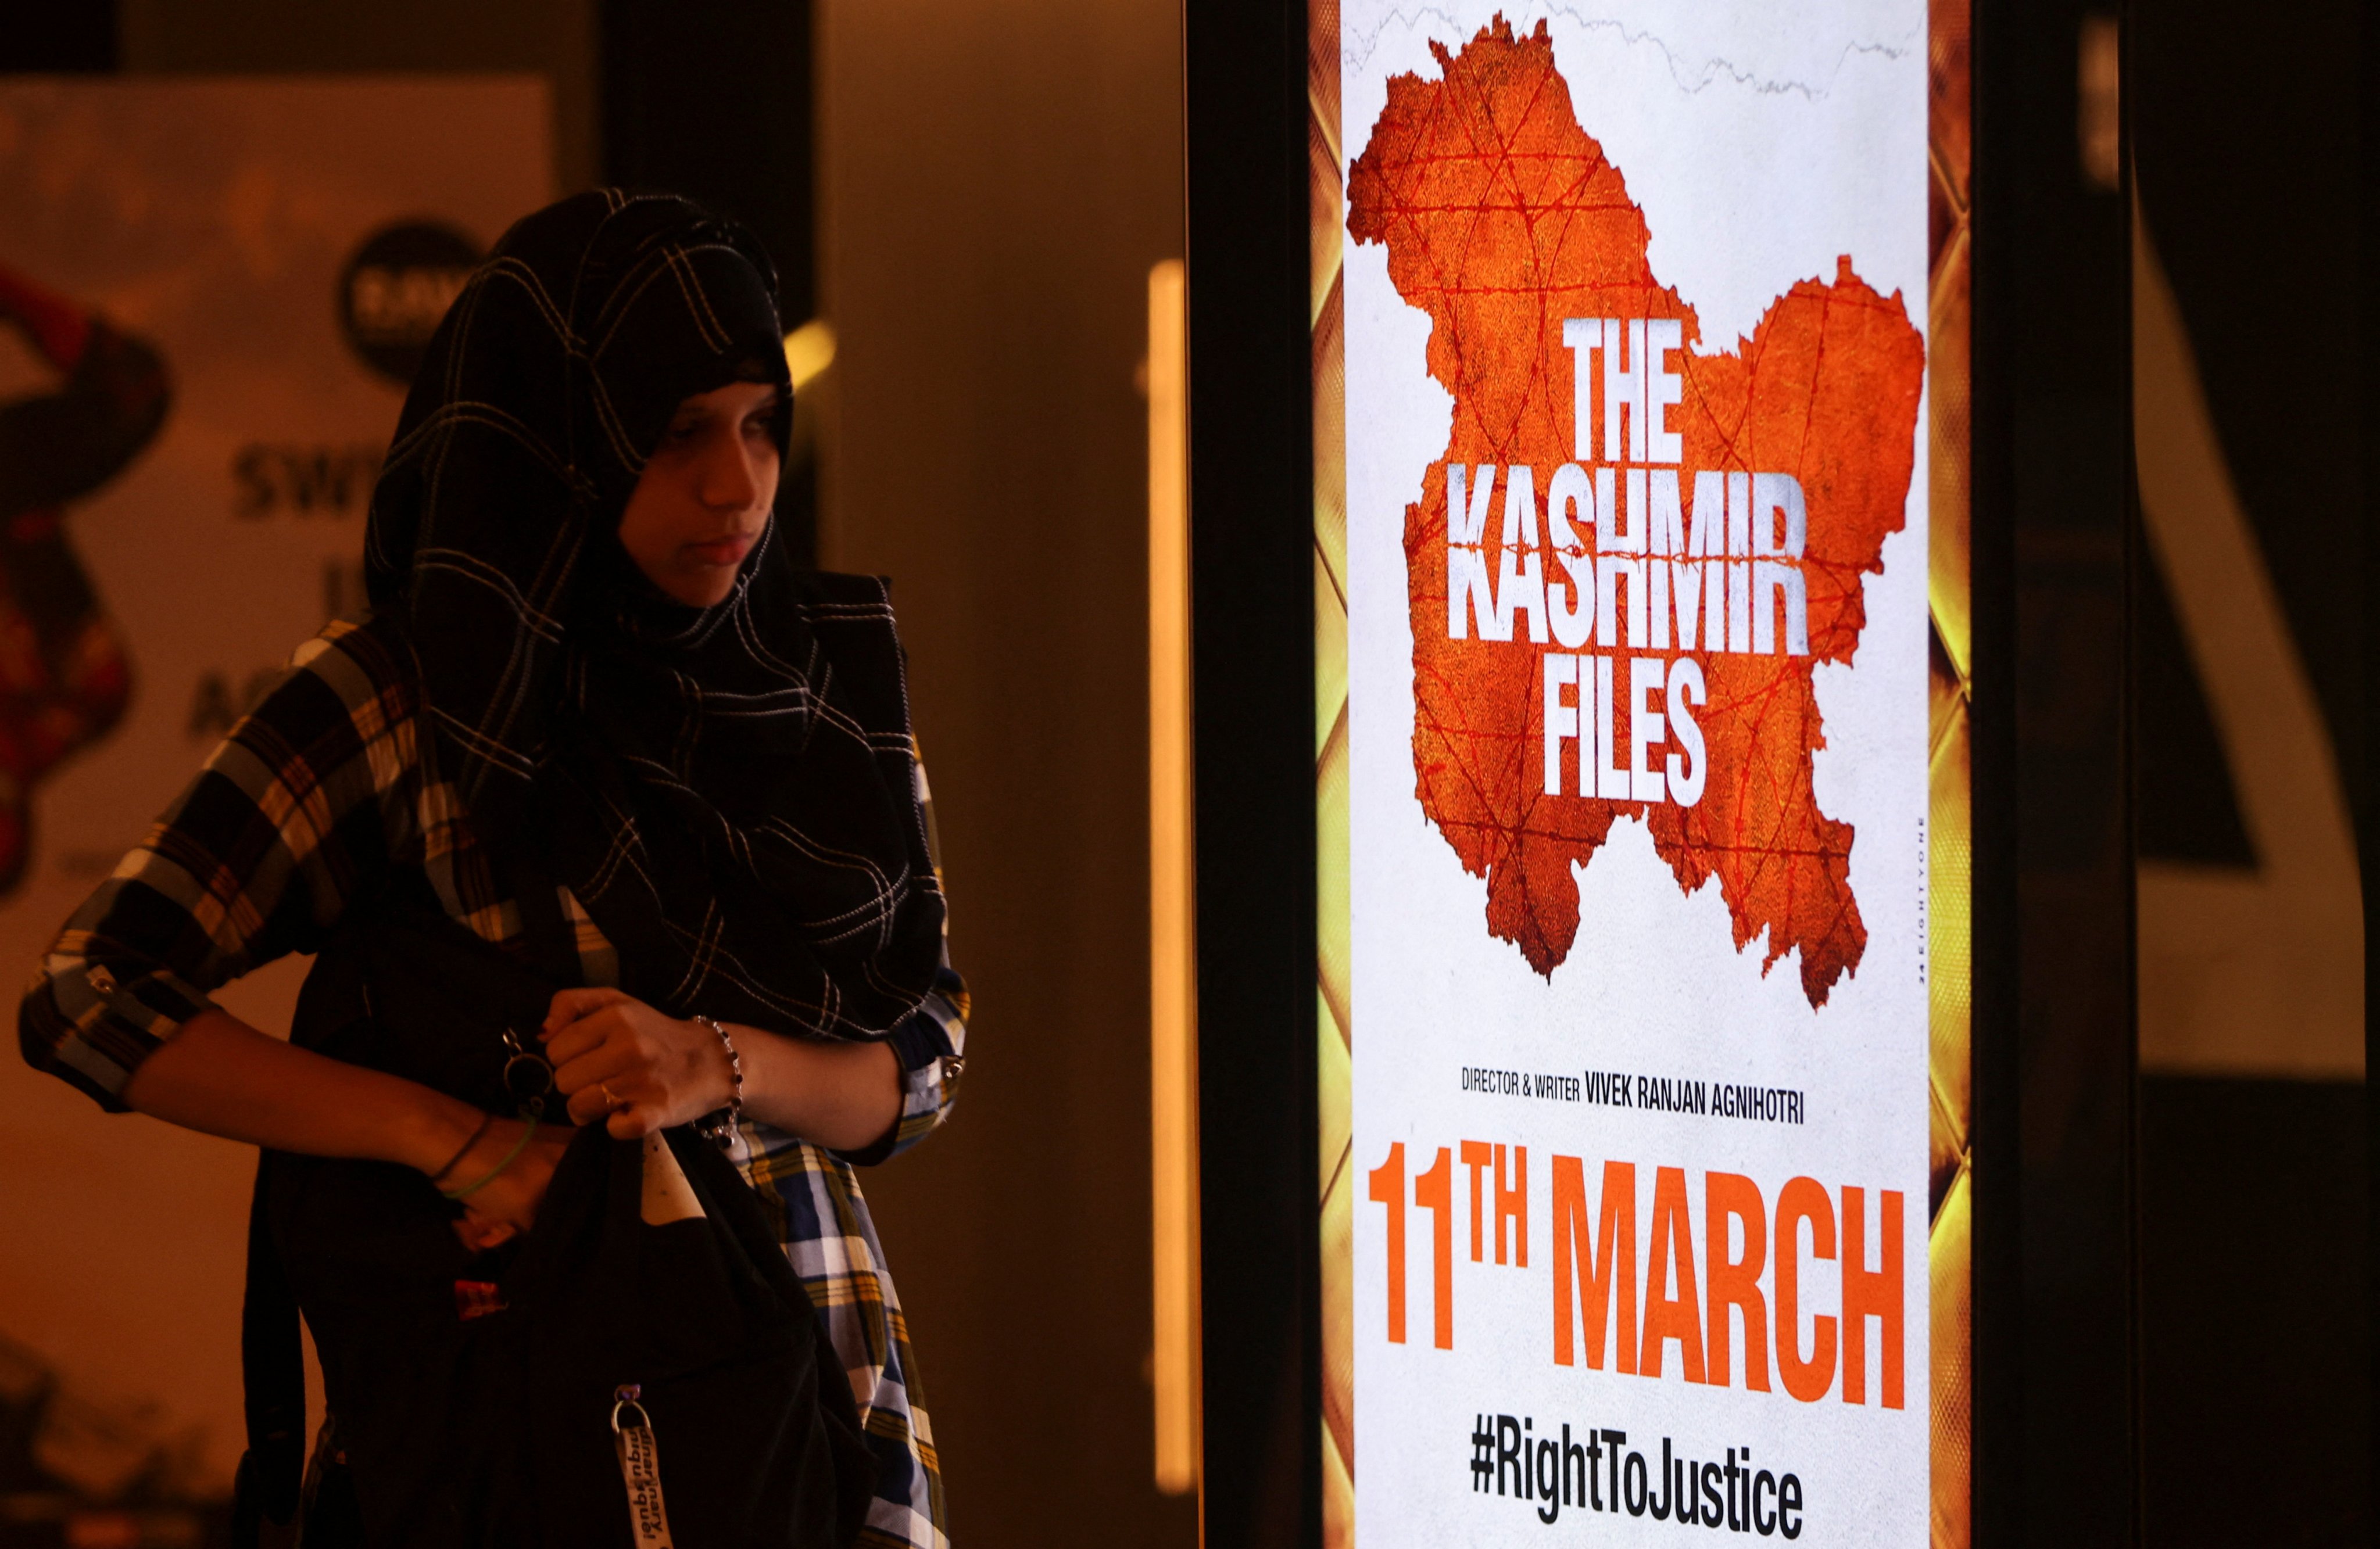 A girl walks past a poster for ‘The Kashmir Files’ inside a cinema in Mumbai earlier this year. Photo: Reuters